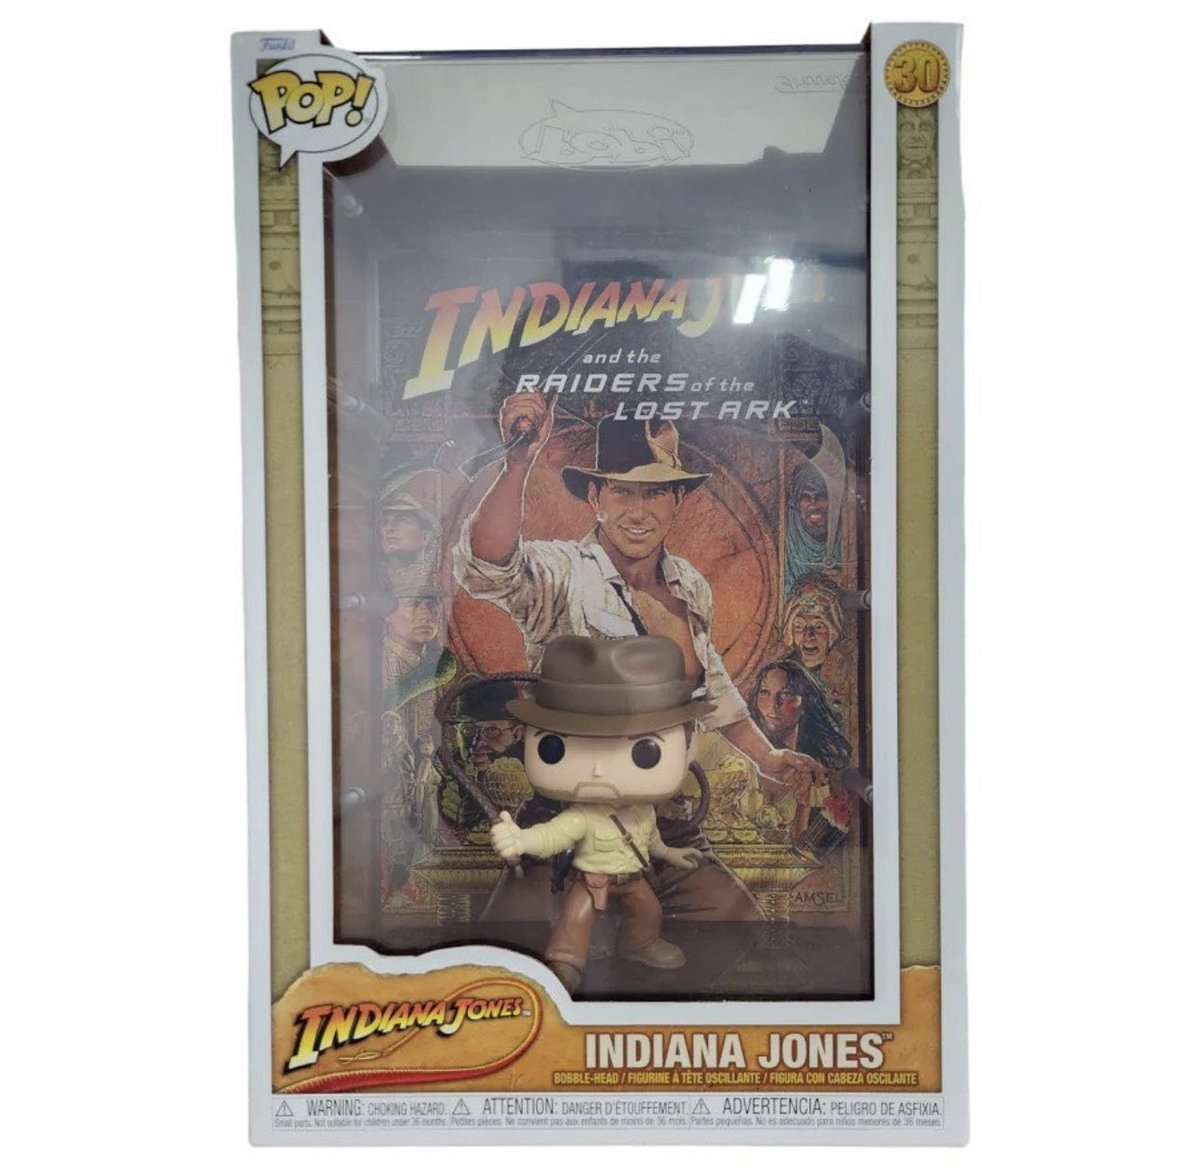 First look at Indiana Jones and Raiders of the Lost Ark Pop Movie Poster!
.
Repost @funkoinfo_
#IndianaJones #Funko #FunkoPop #FunkoPopVinyl #Pop #PopVinyl #Collectibles #Collectible #DisTrackers #RaidersoftheLostArk